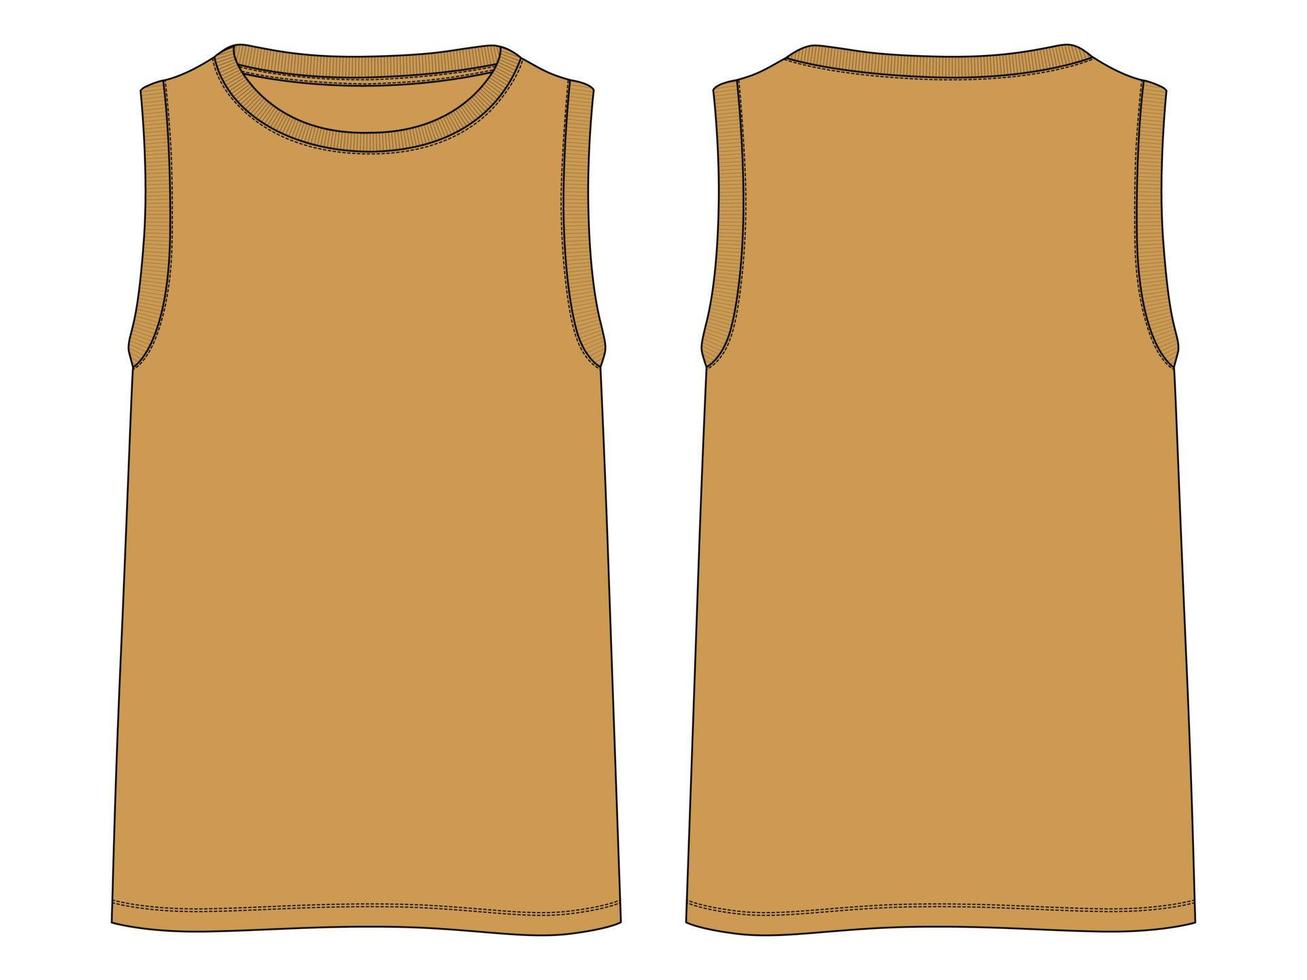 Tank Tops Technical Fashion flat sketch vector illustration Yellow Color template Front and back views. Apparel tank tops mock up for men's and boys.